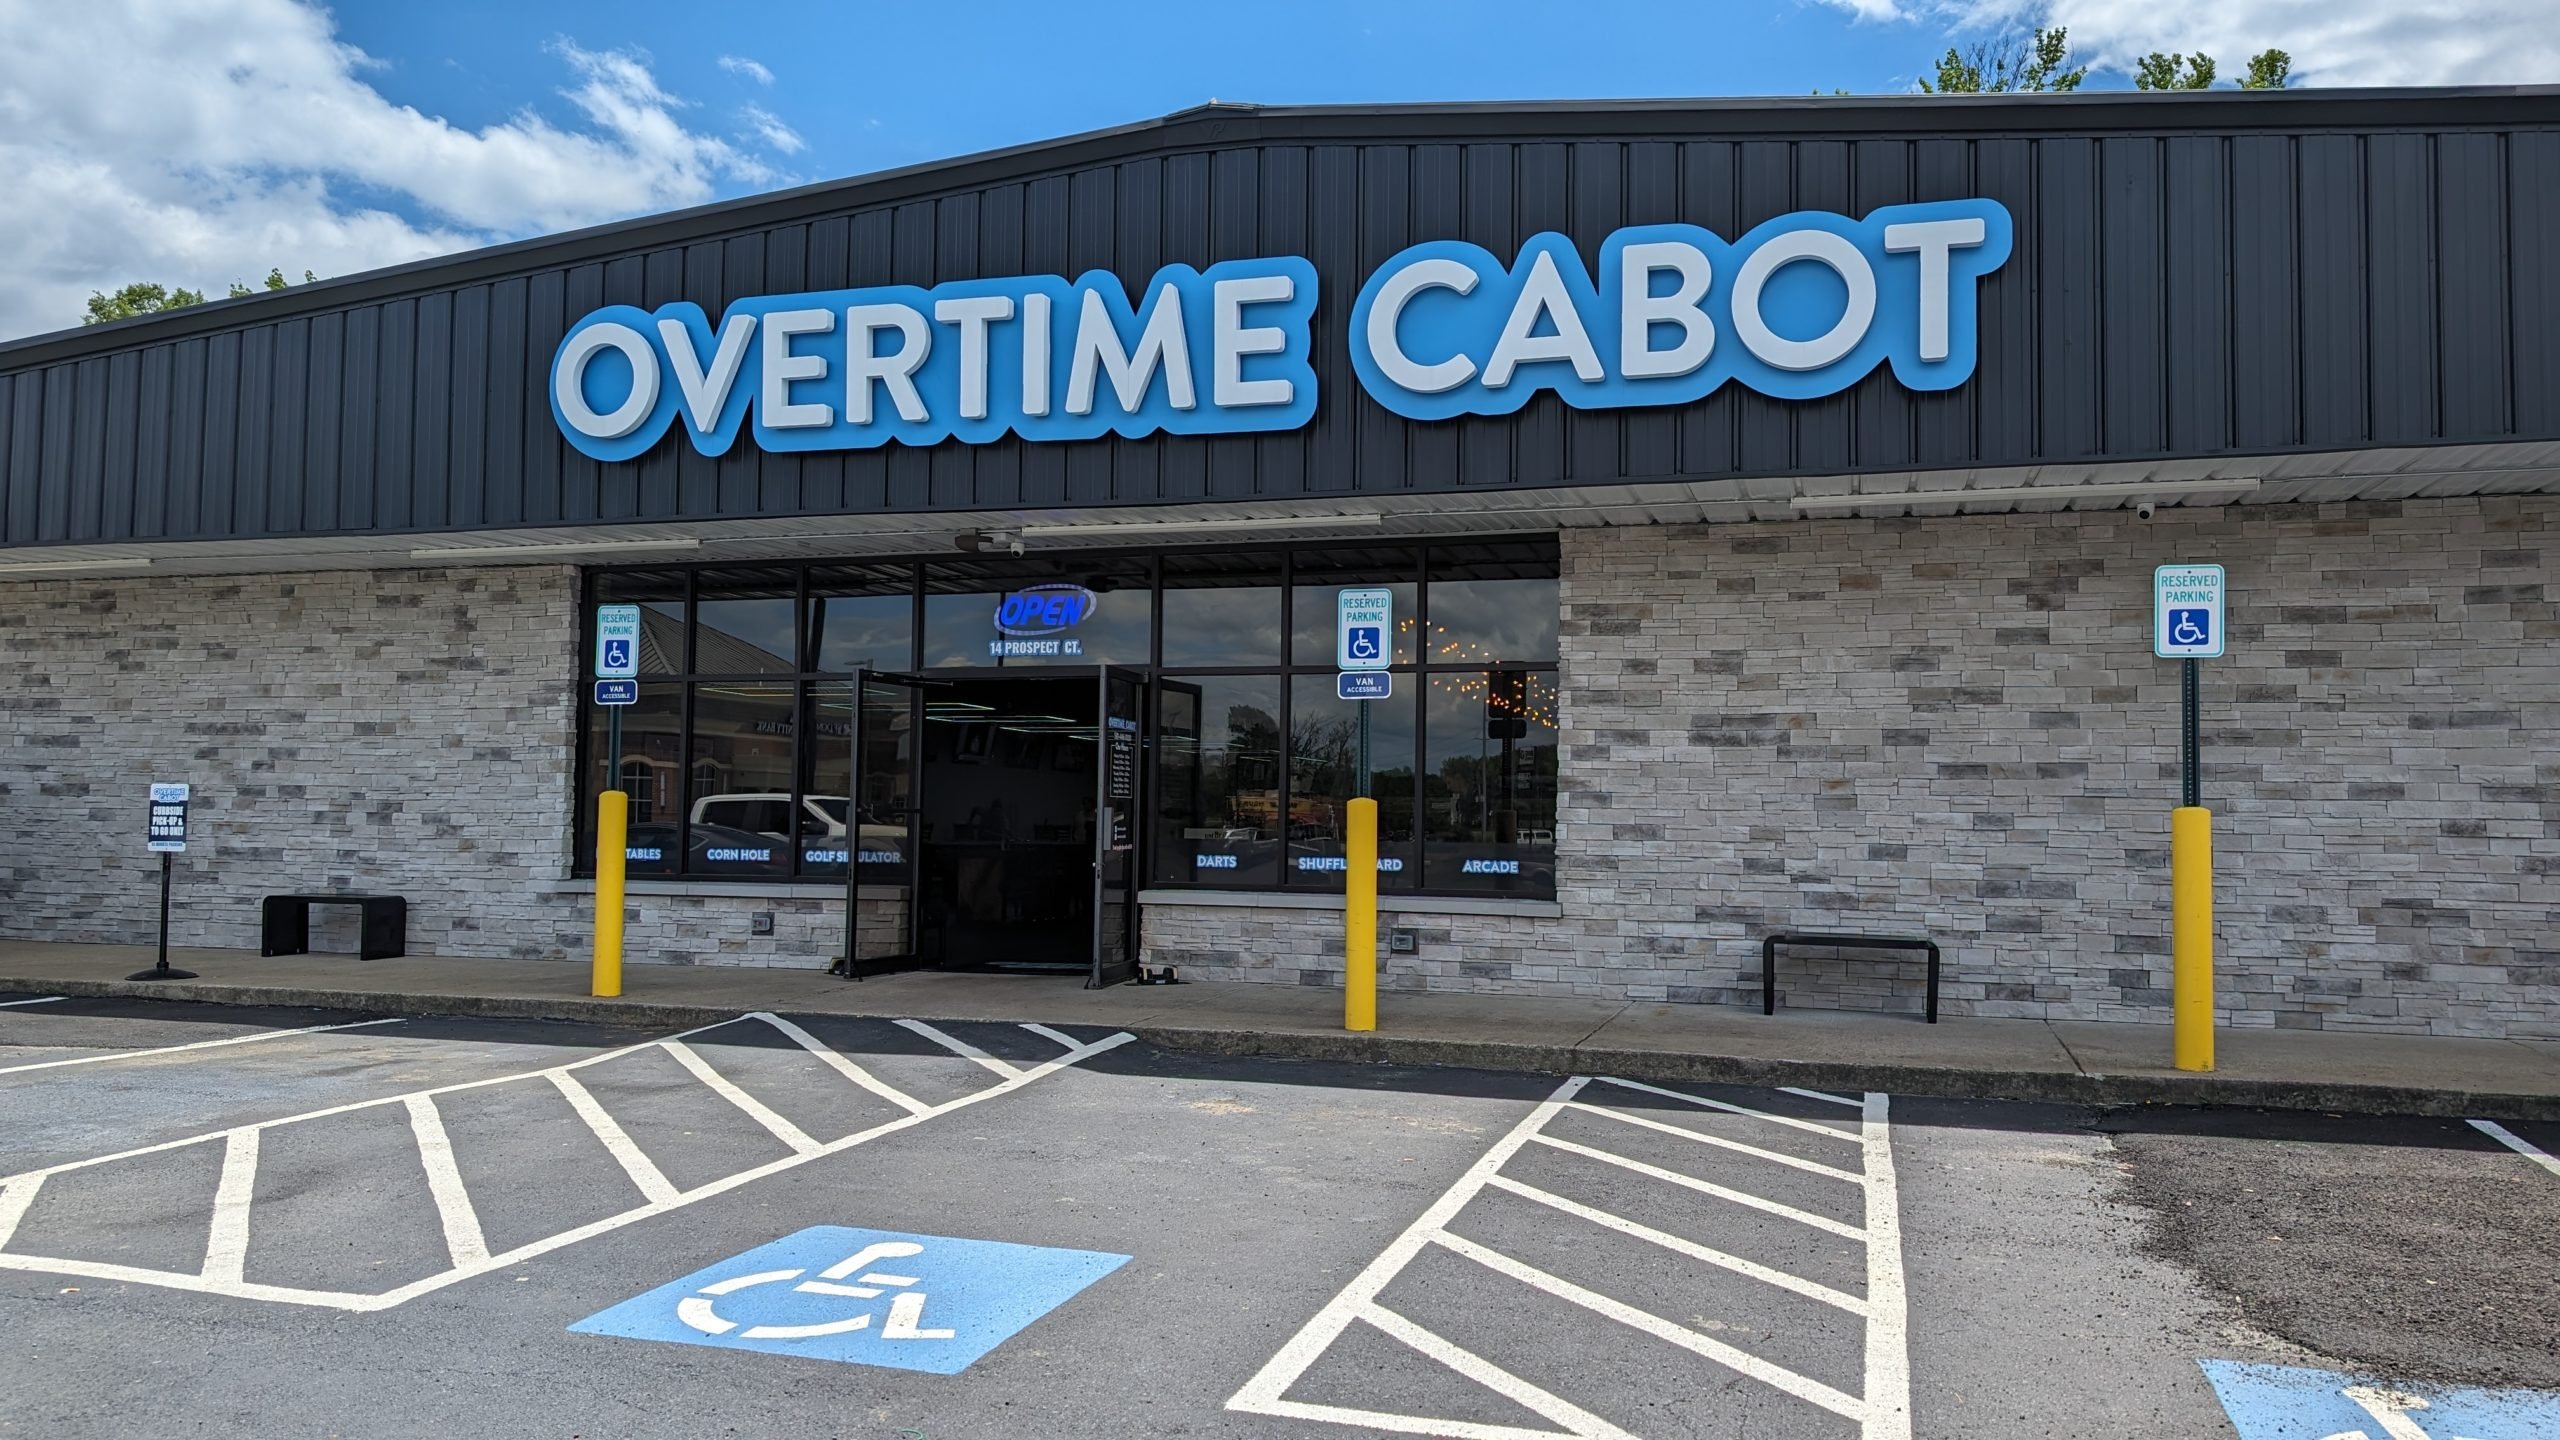 Overtime Cabot: A New Hub for Community and Entertainment